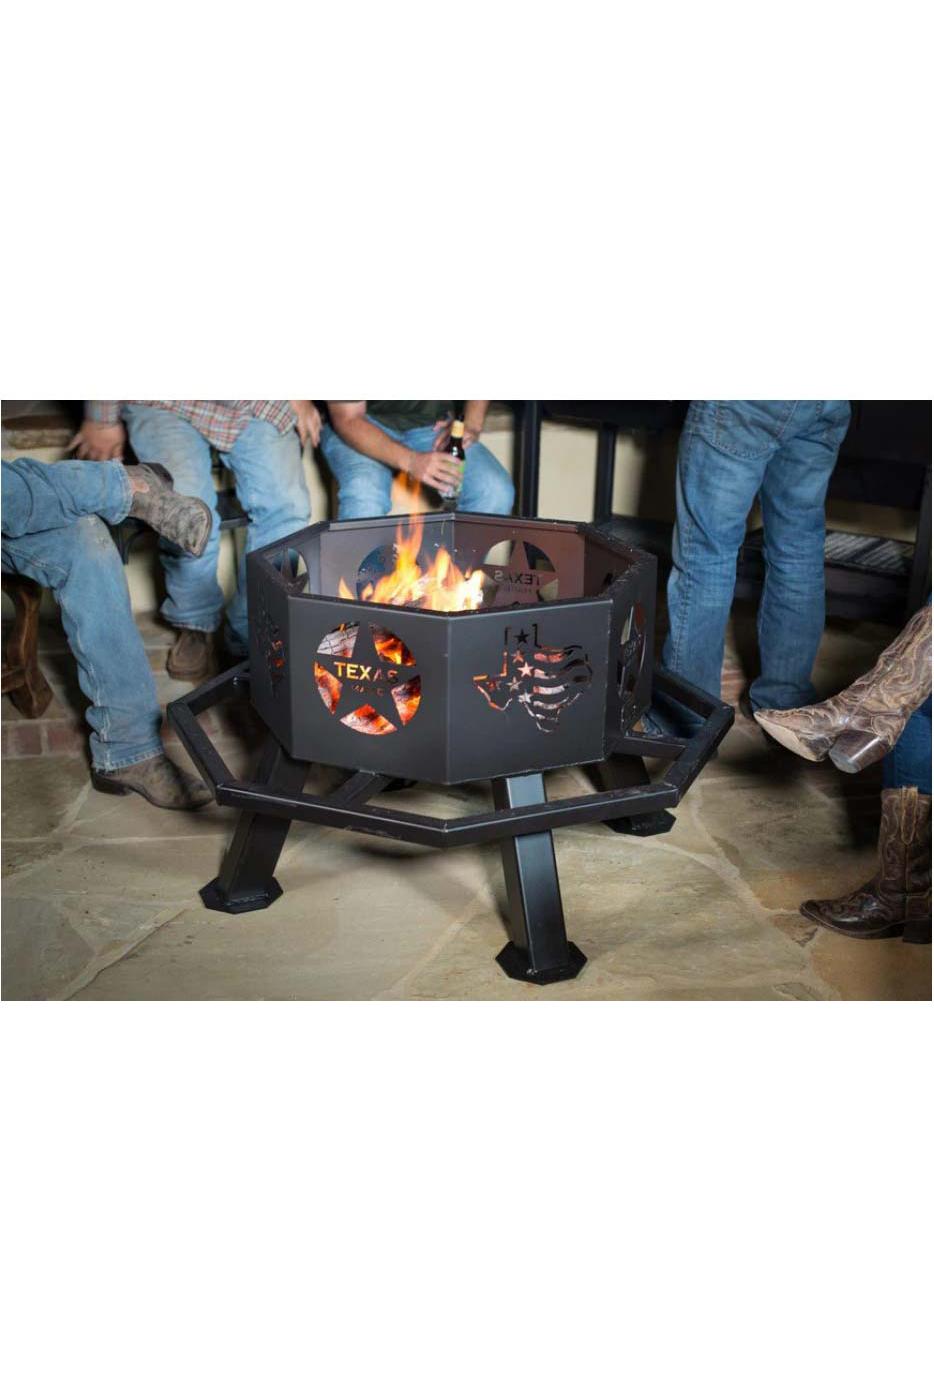 All Seasons Feeders Texas Theme Fire Pit; image 2 of 2